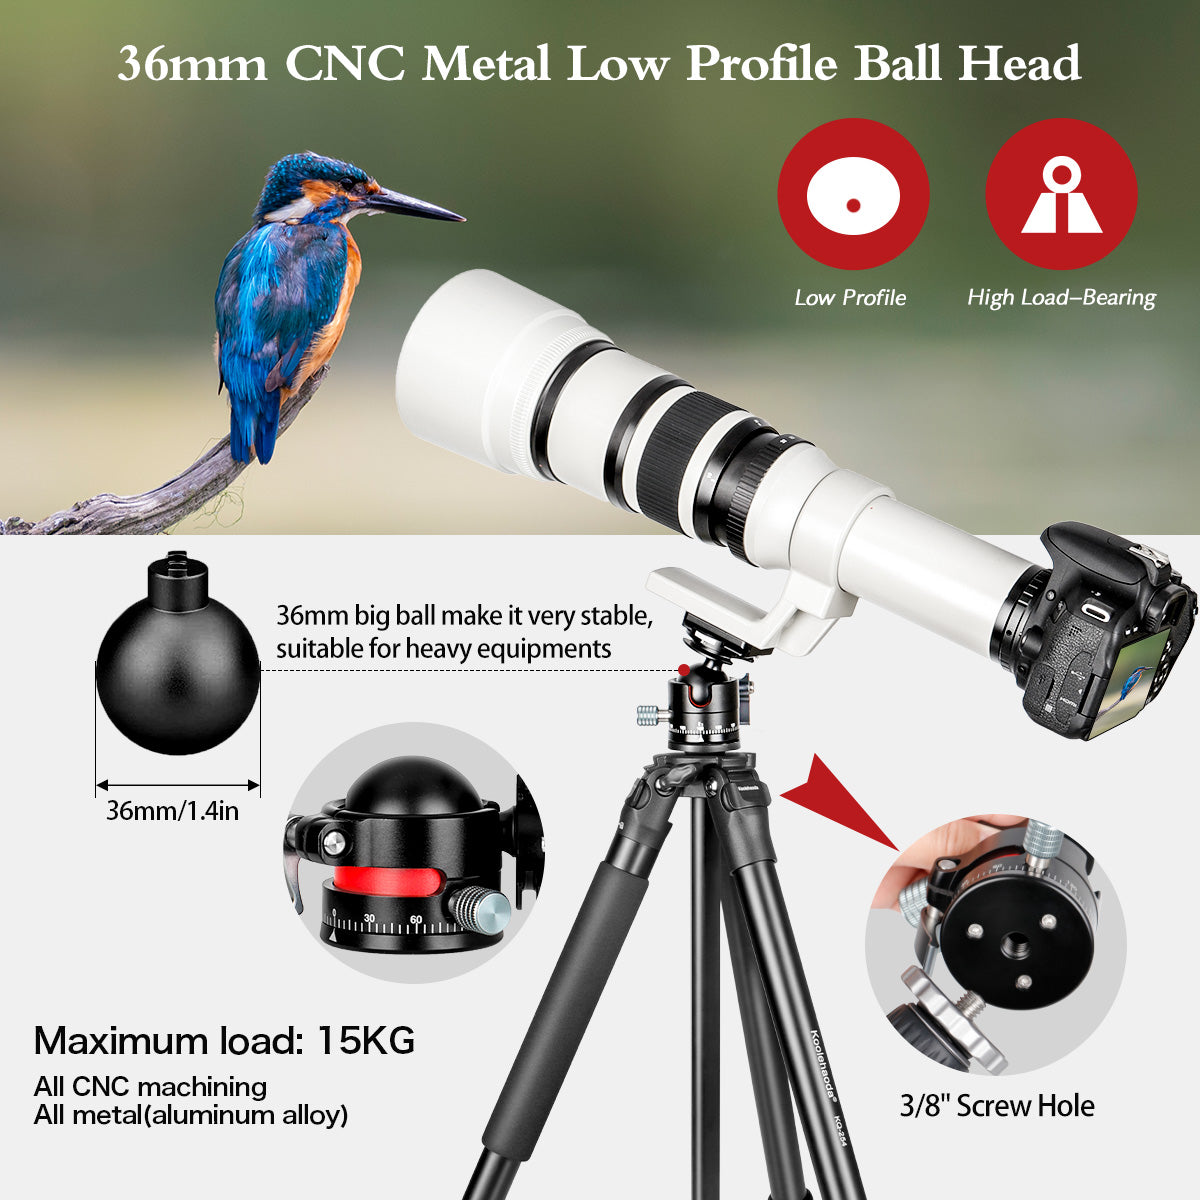 Camera Tripod 62inch Aluminum Portable Tripod Monopod Kit with 36mm Ball Head and Carrying Bag for DSLR Camera,Loading Up to 33lbs /15kg